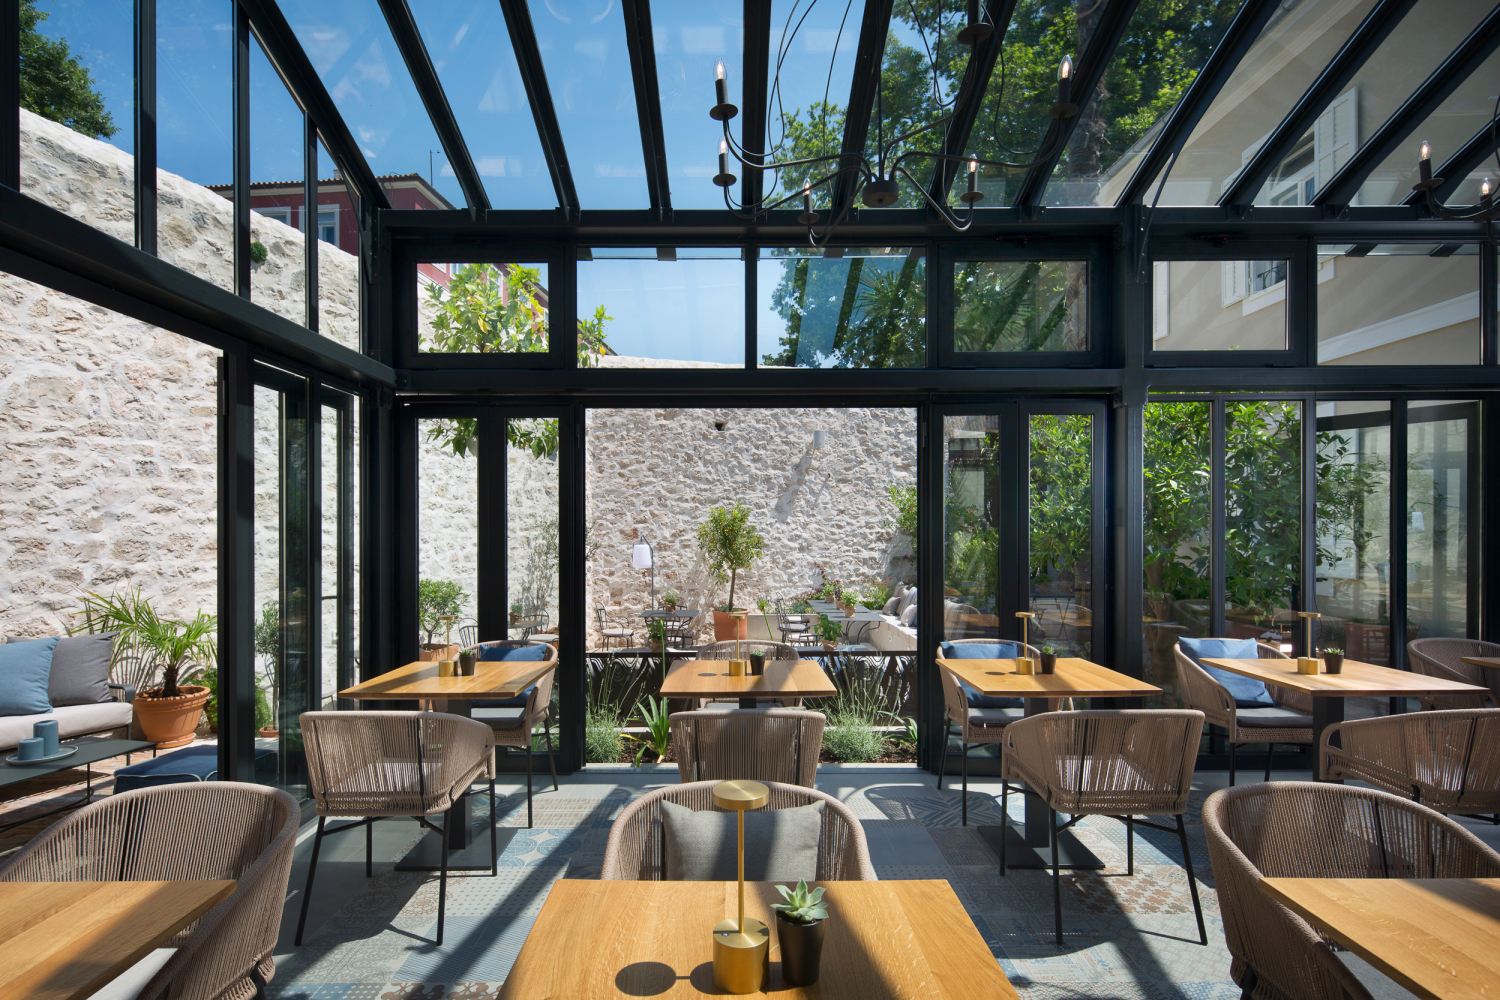 A steel and glass orangery full of wooden dining tables and chairs